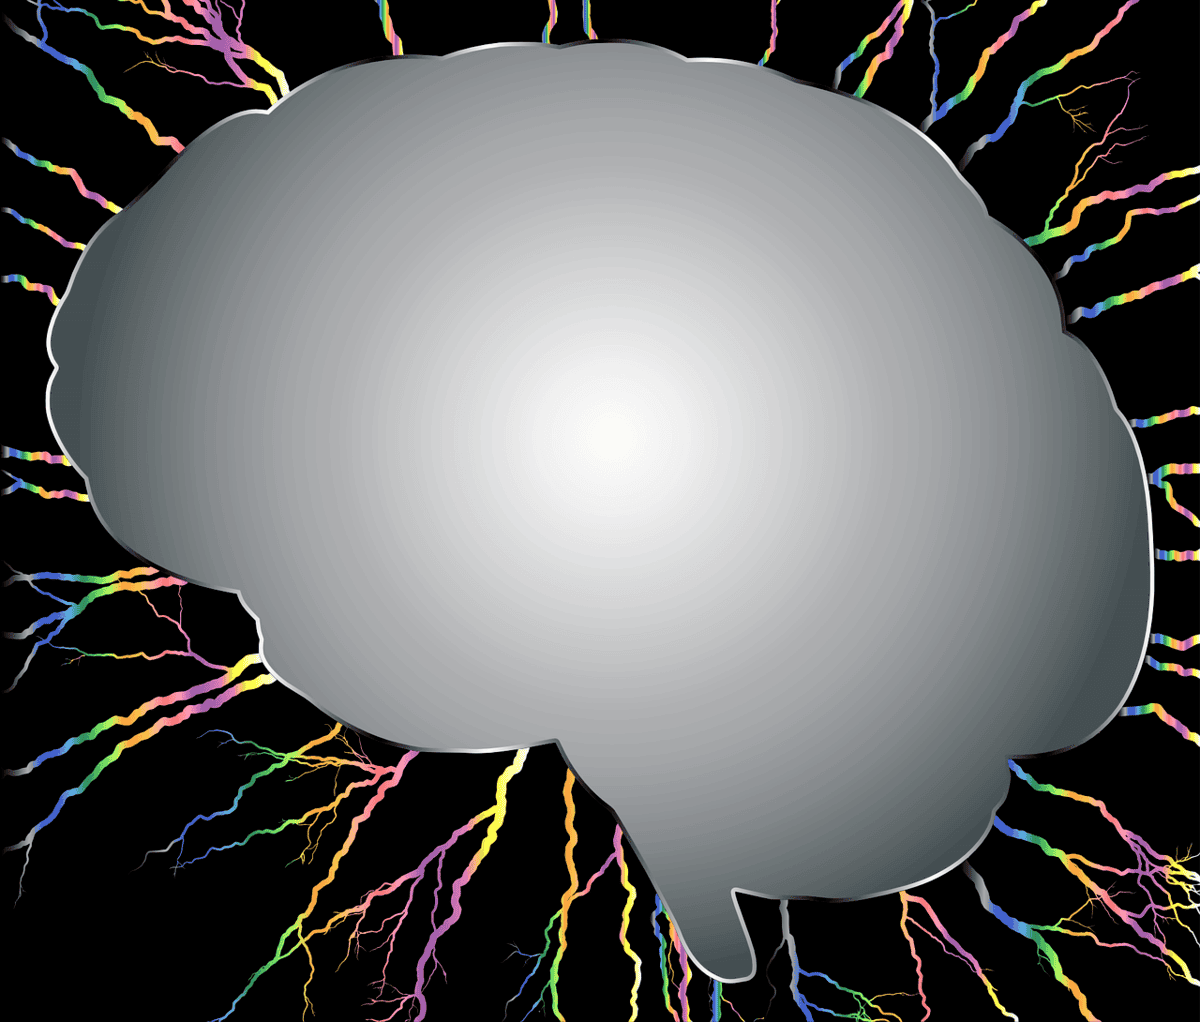 brain illustration with color waves radiating outward